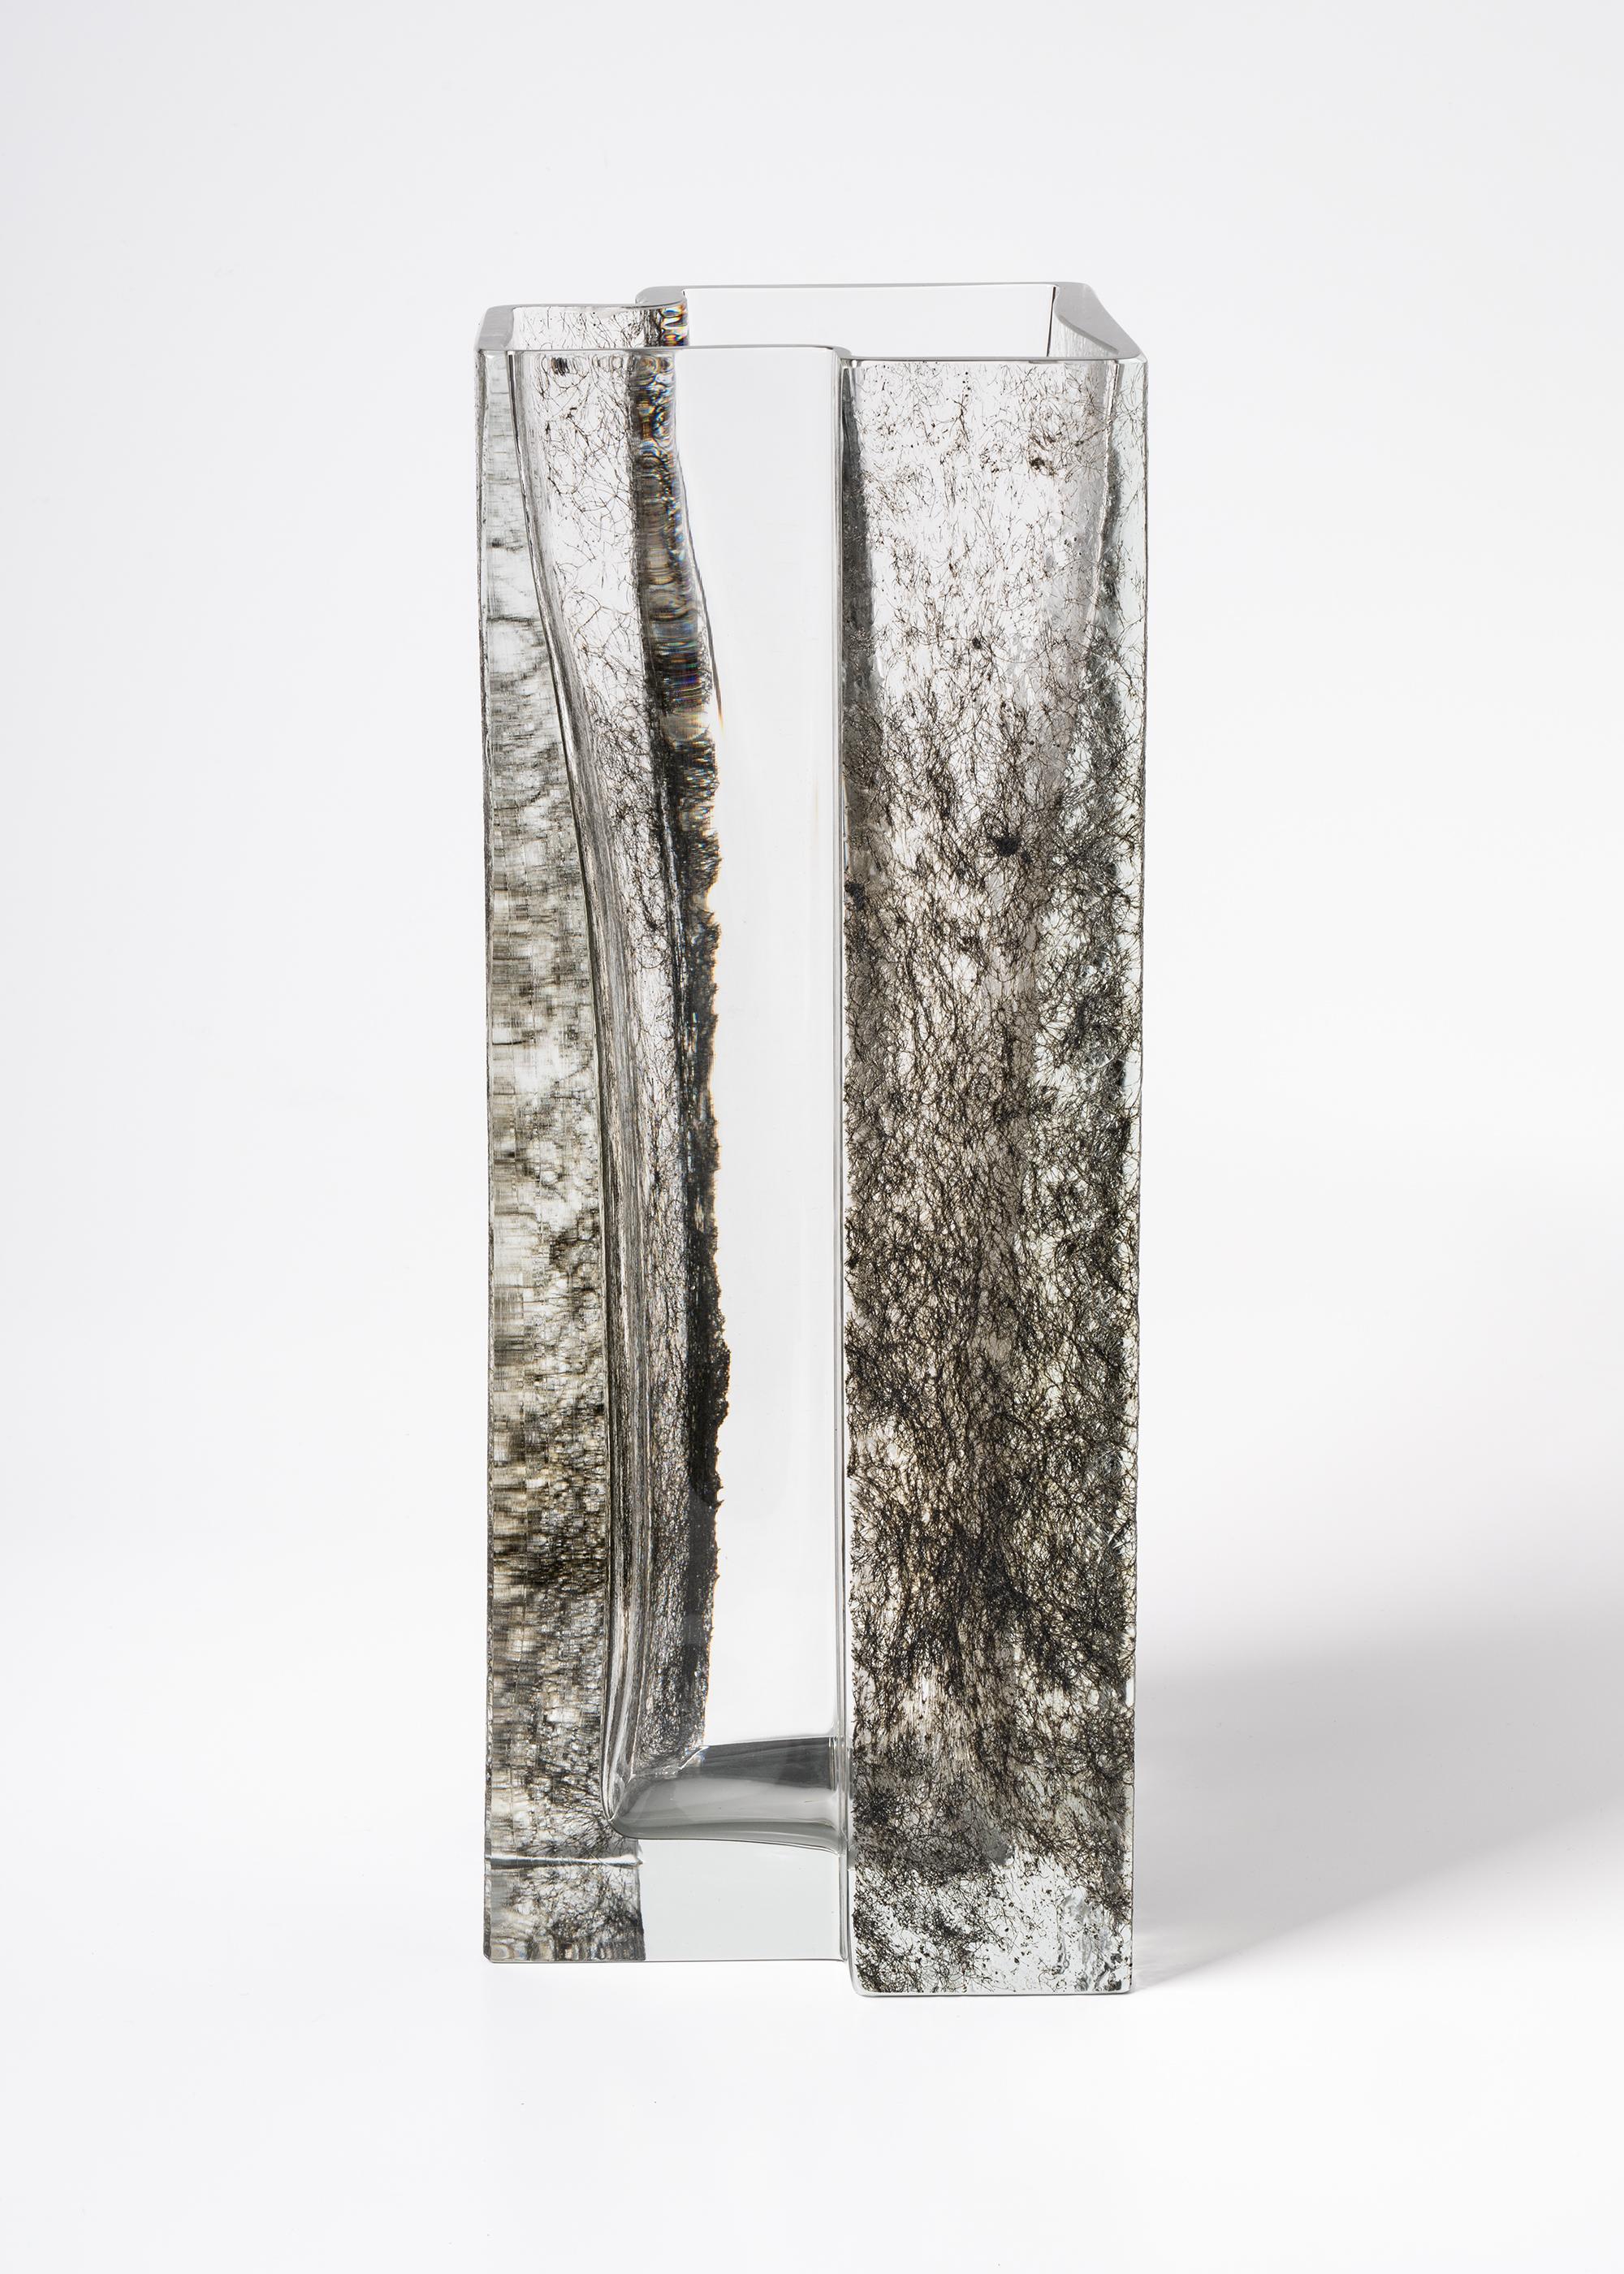 Inside the wood vase by Paolo Marcolongo
Dimensions: 42.2 x 16 x H 16.6 cm 
Materials: Murano glass and iron.


Paolo Marcolongo was born in Padua in 1956, he attended the Art High School 